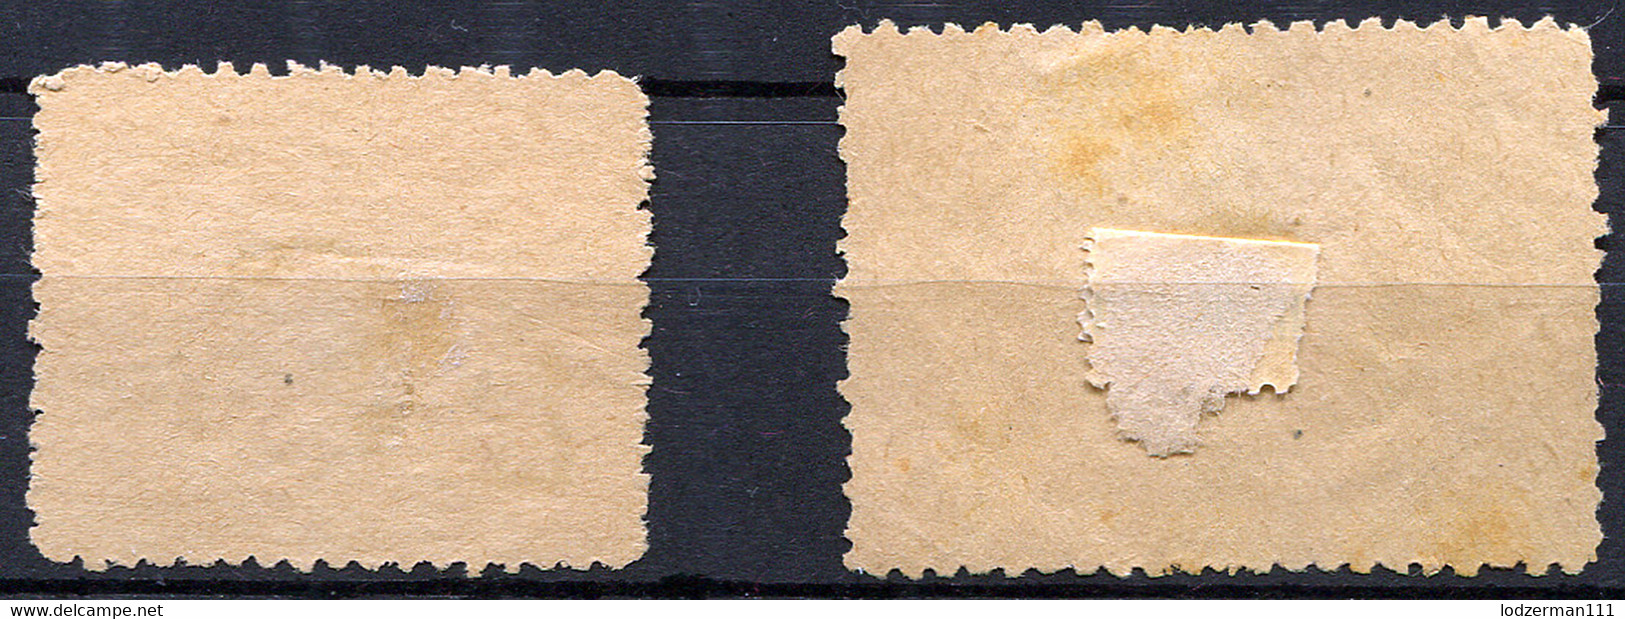 POLAND - Two Telegraph Labels (without Gum) Very Rare - Labels